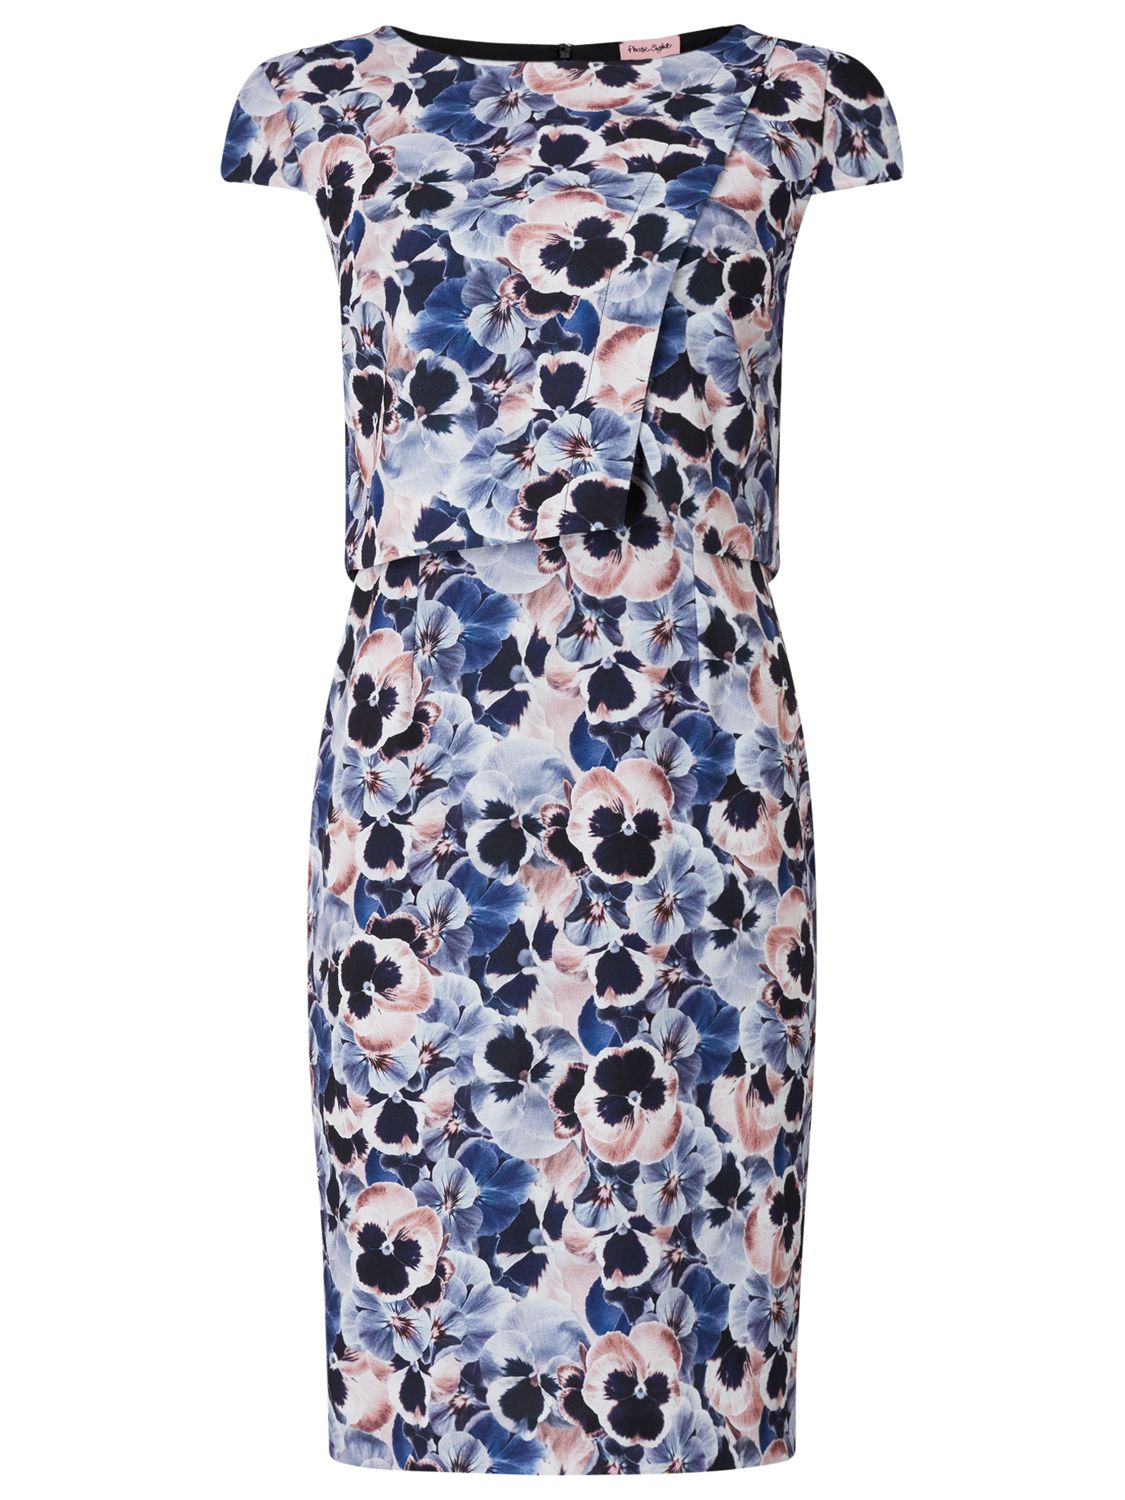 Phase Eight Pansy Print Dress, Multi at John Lewis & Partners